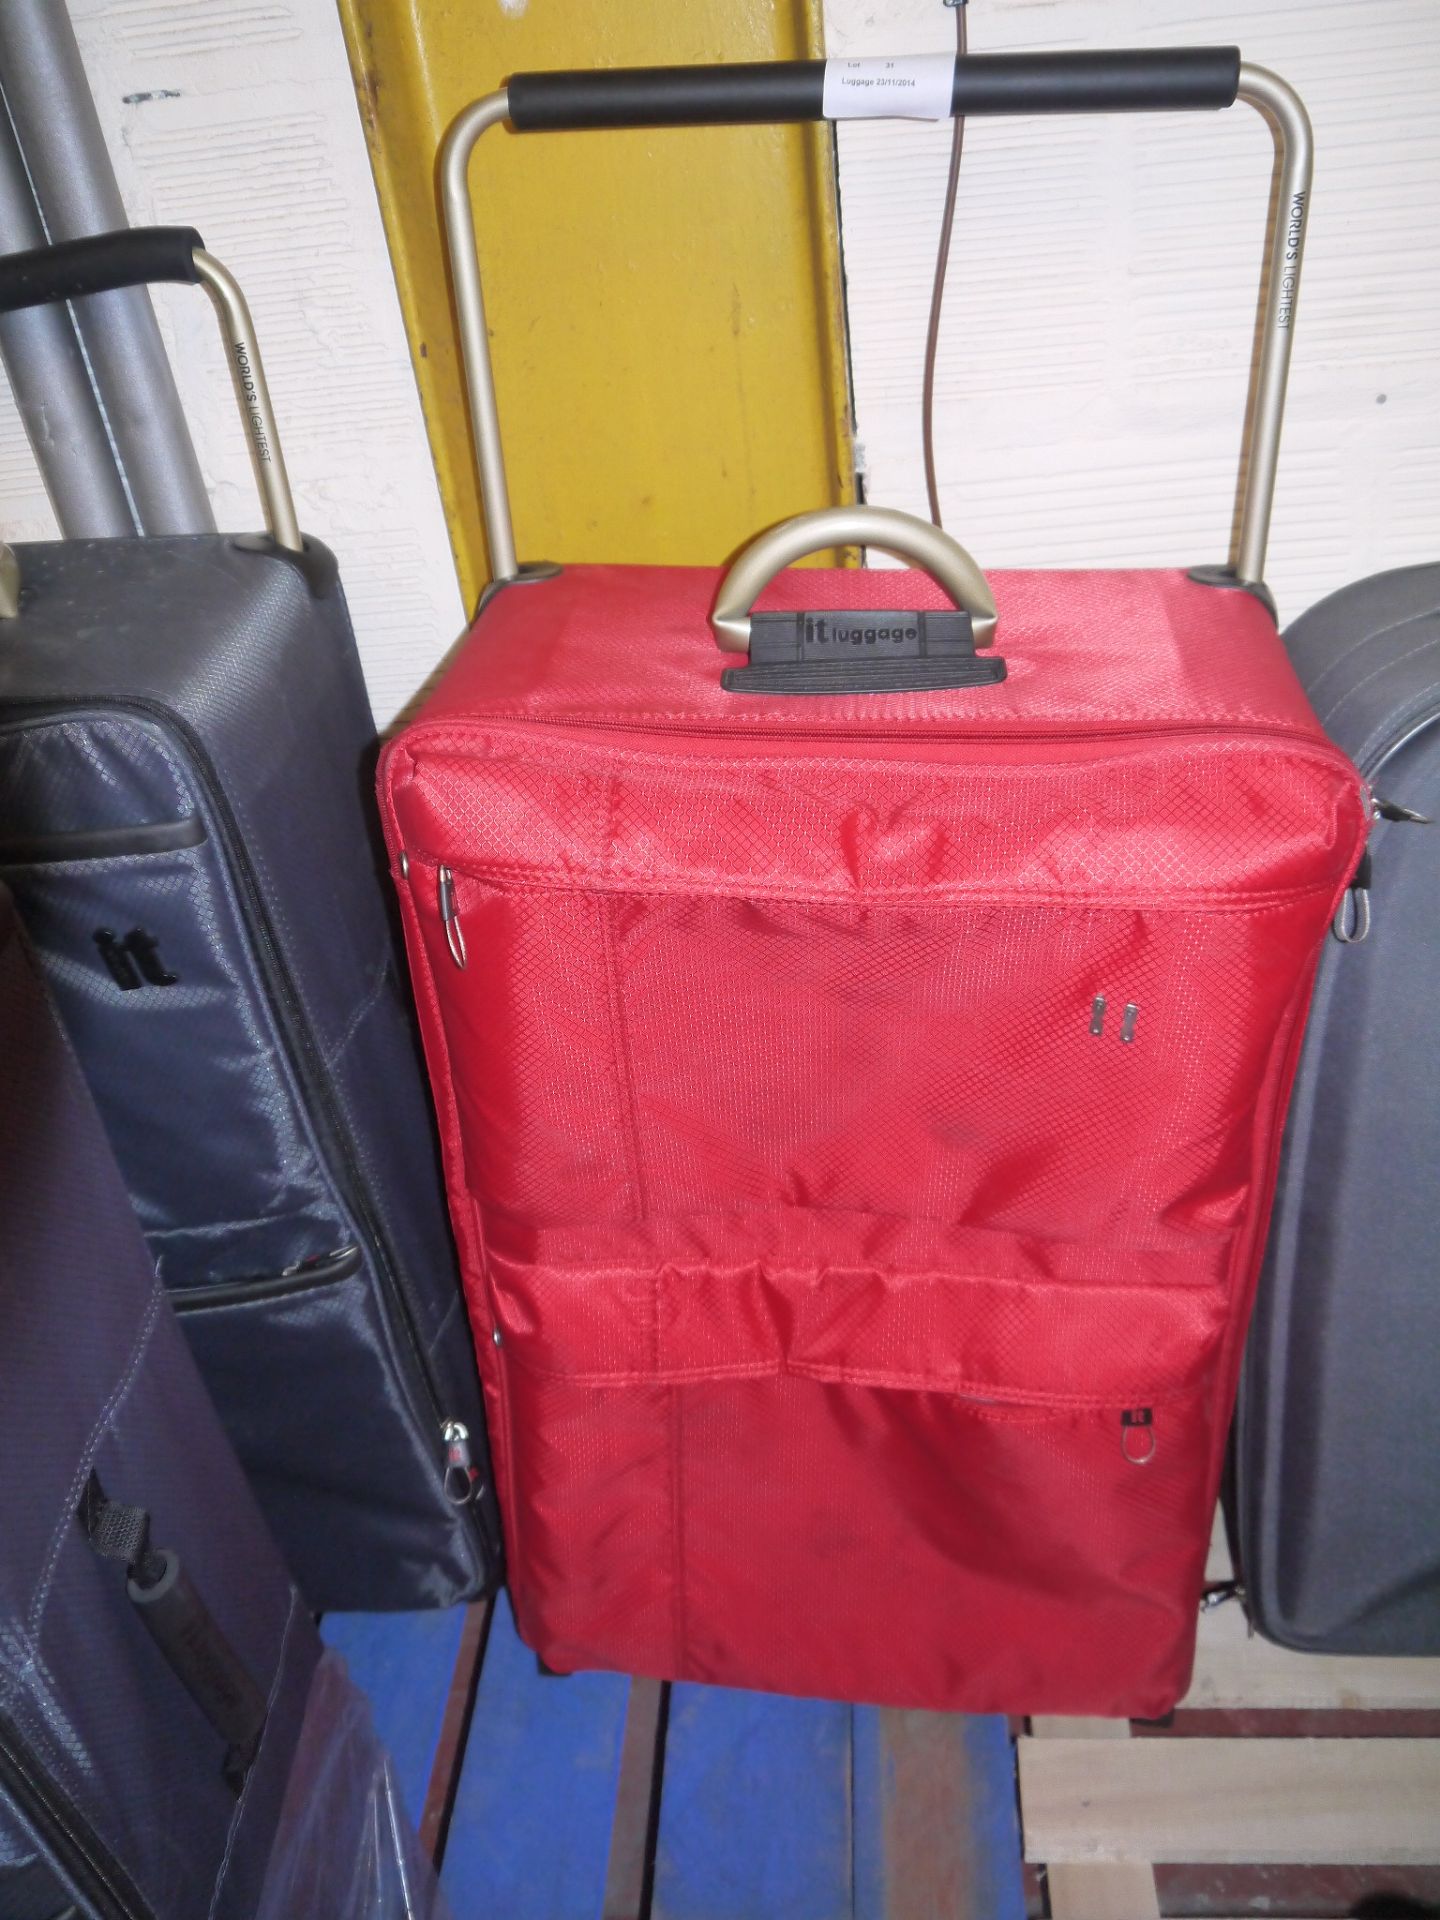 IT International Worlds Lightest Luggage, Large Red roller suitcase in very good condition